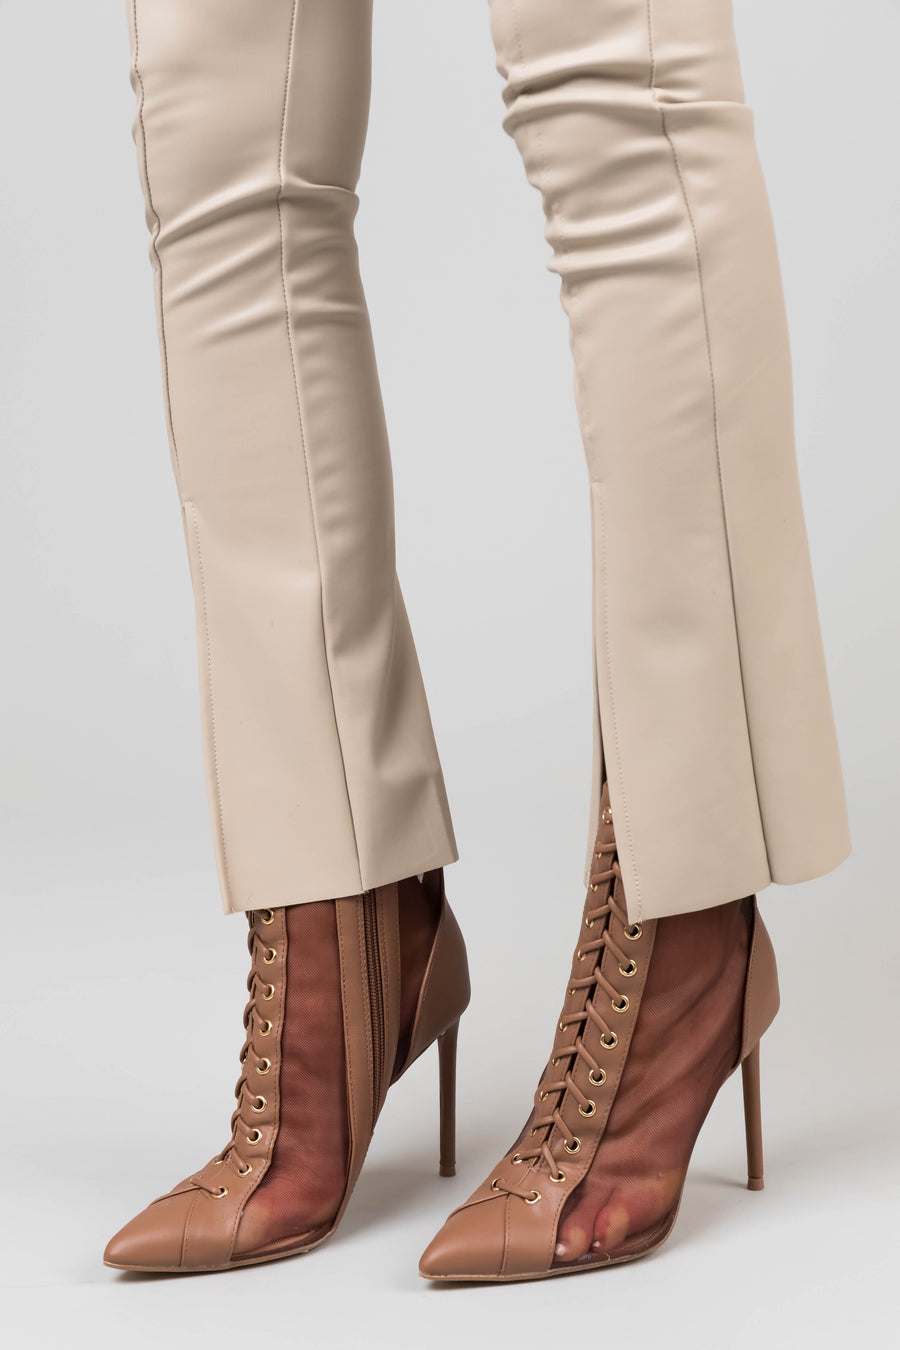 Mocha Sheer Mesh Lace Up Stiletto Booties